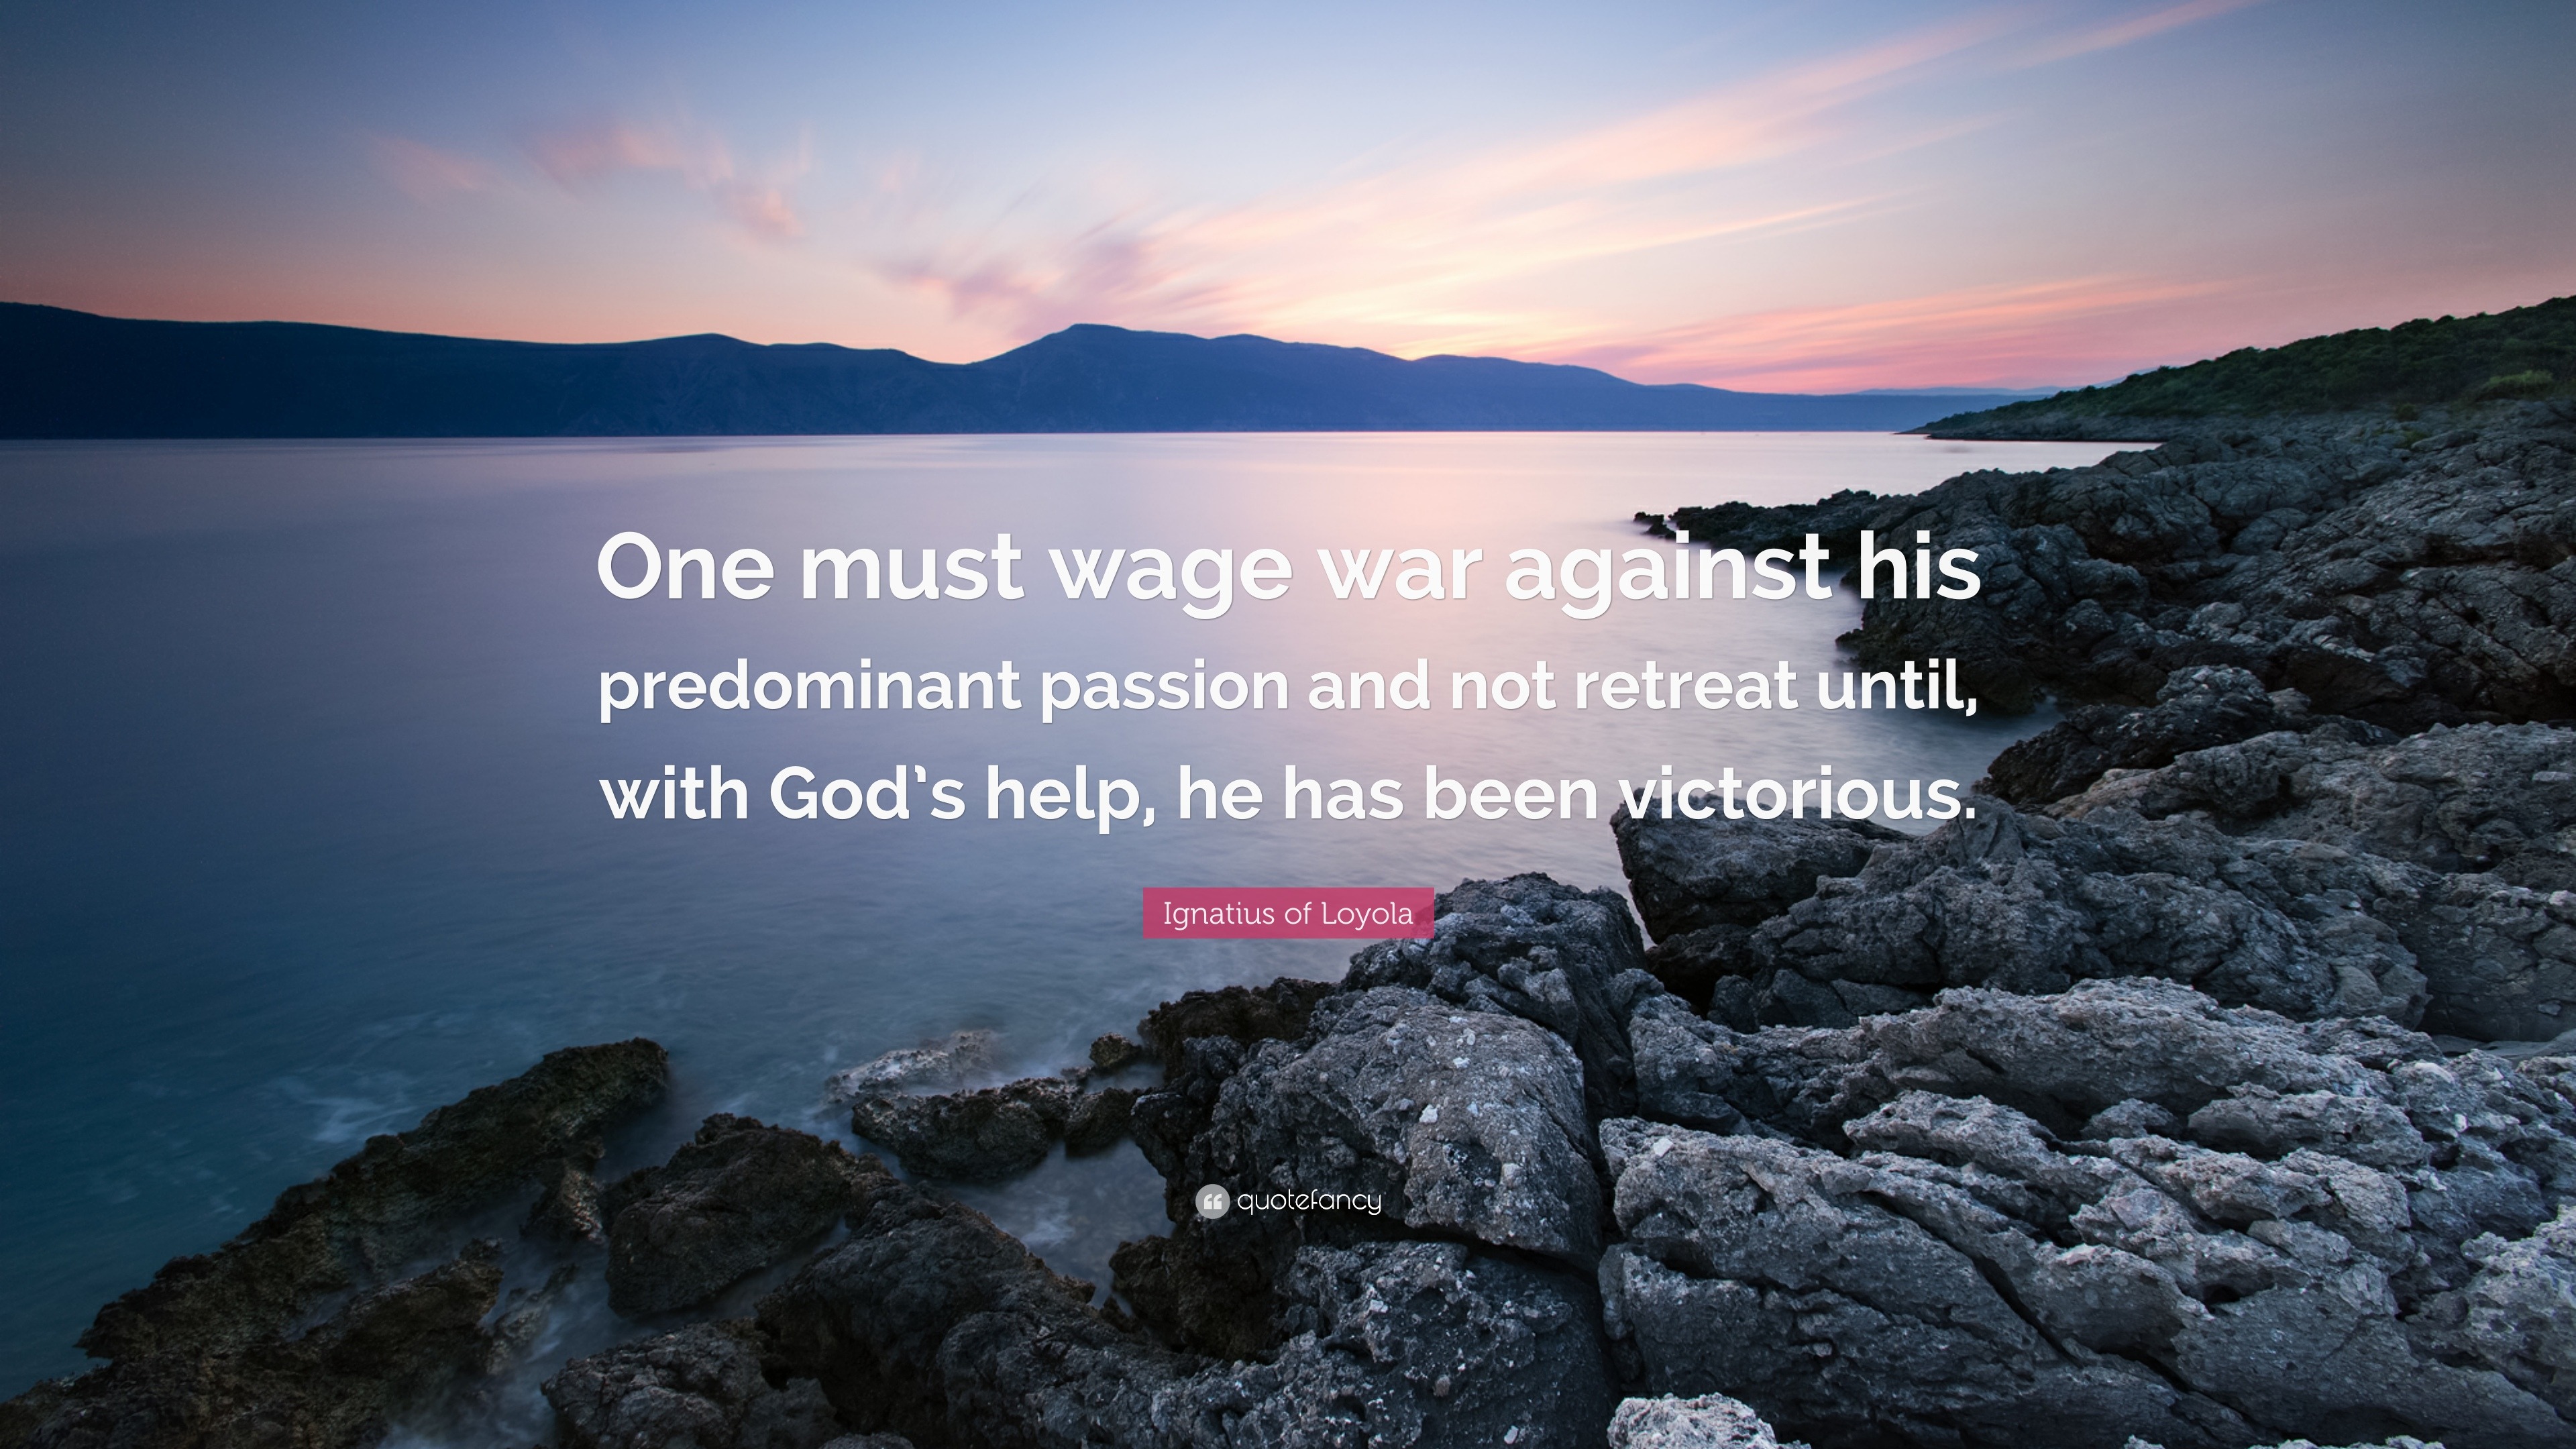 Ignatius of Loyola Quote: “One must wage war against his predominant passion and not retreat until,